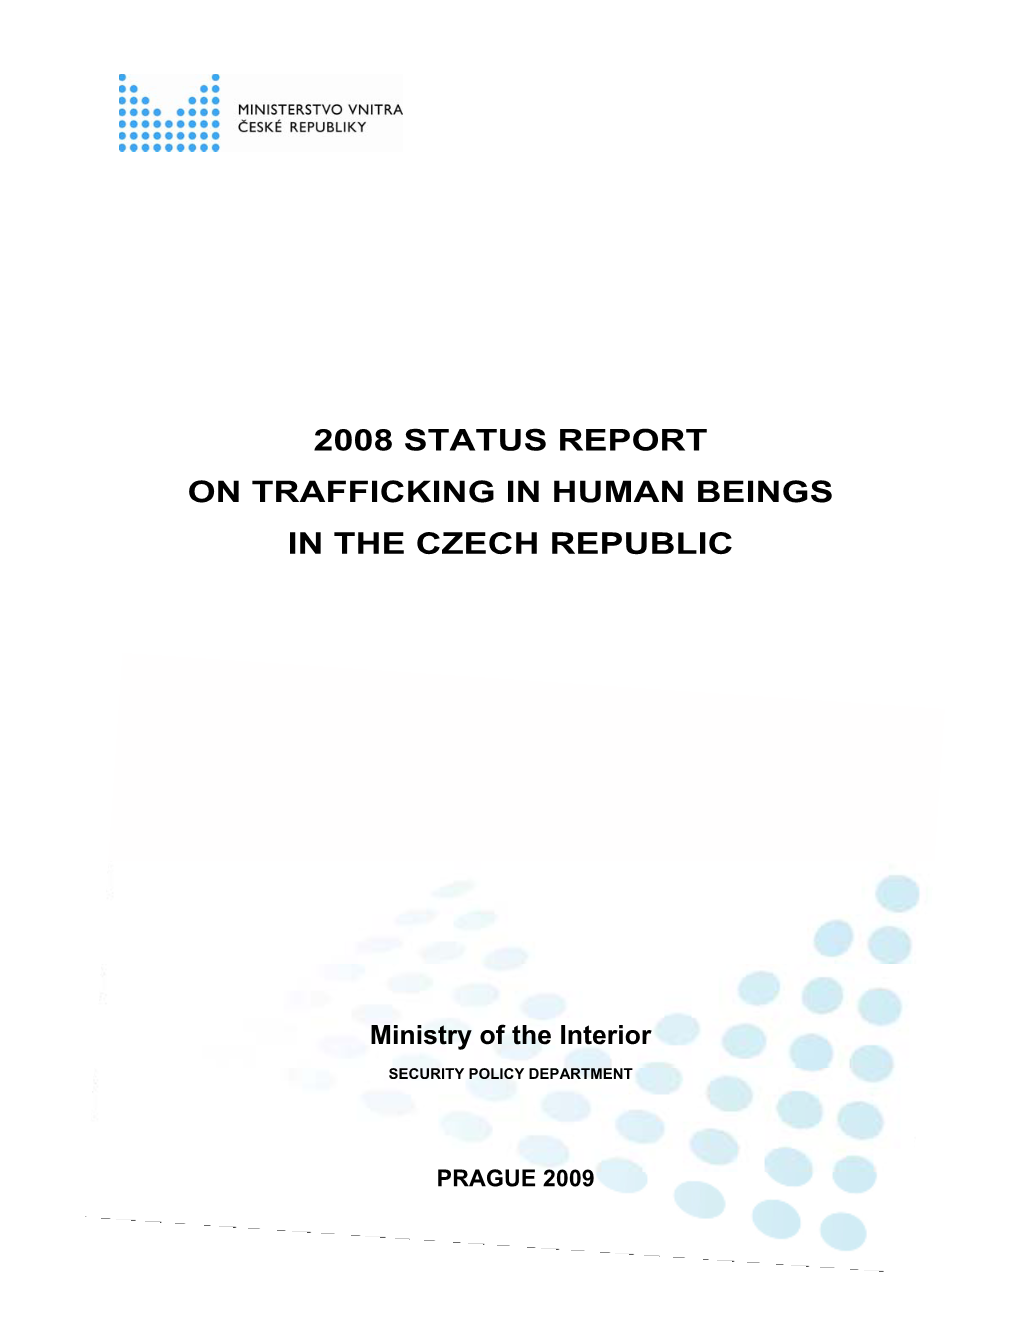 Ministry of Interior, Status Report on Trafficking in Human Beings in The